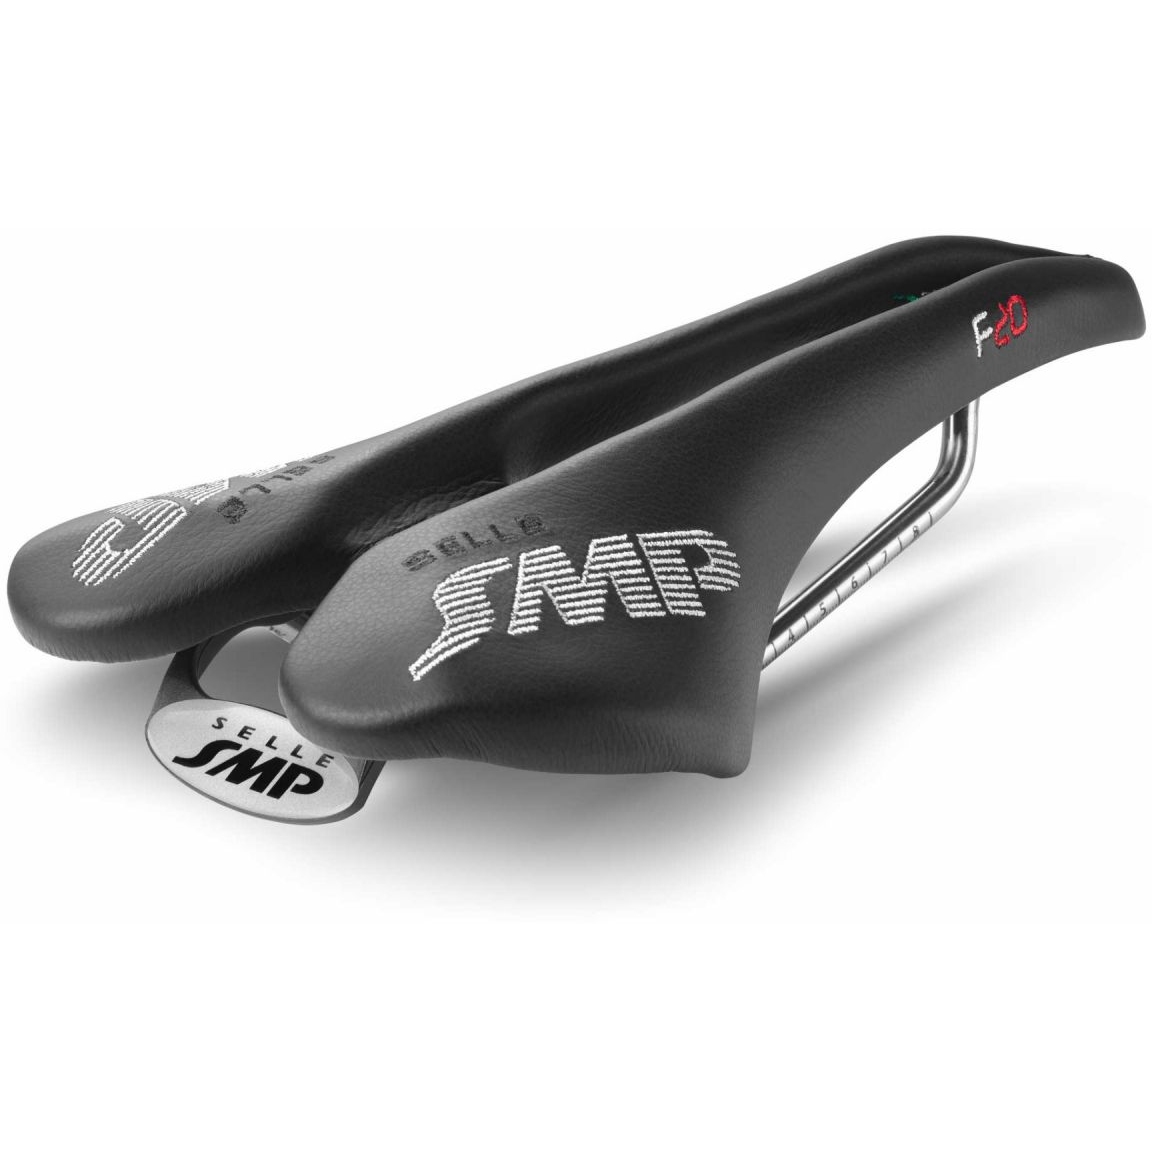 Picture of Selle SMP F20 Saddle - black